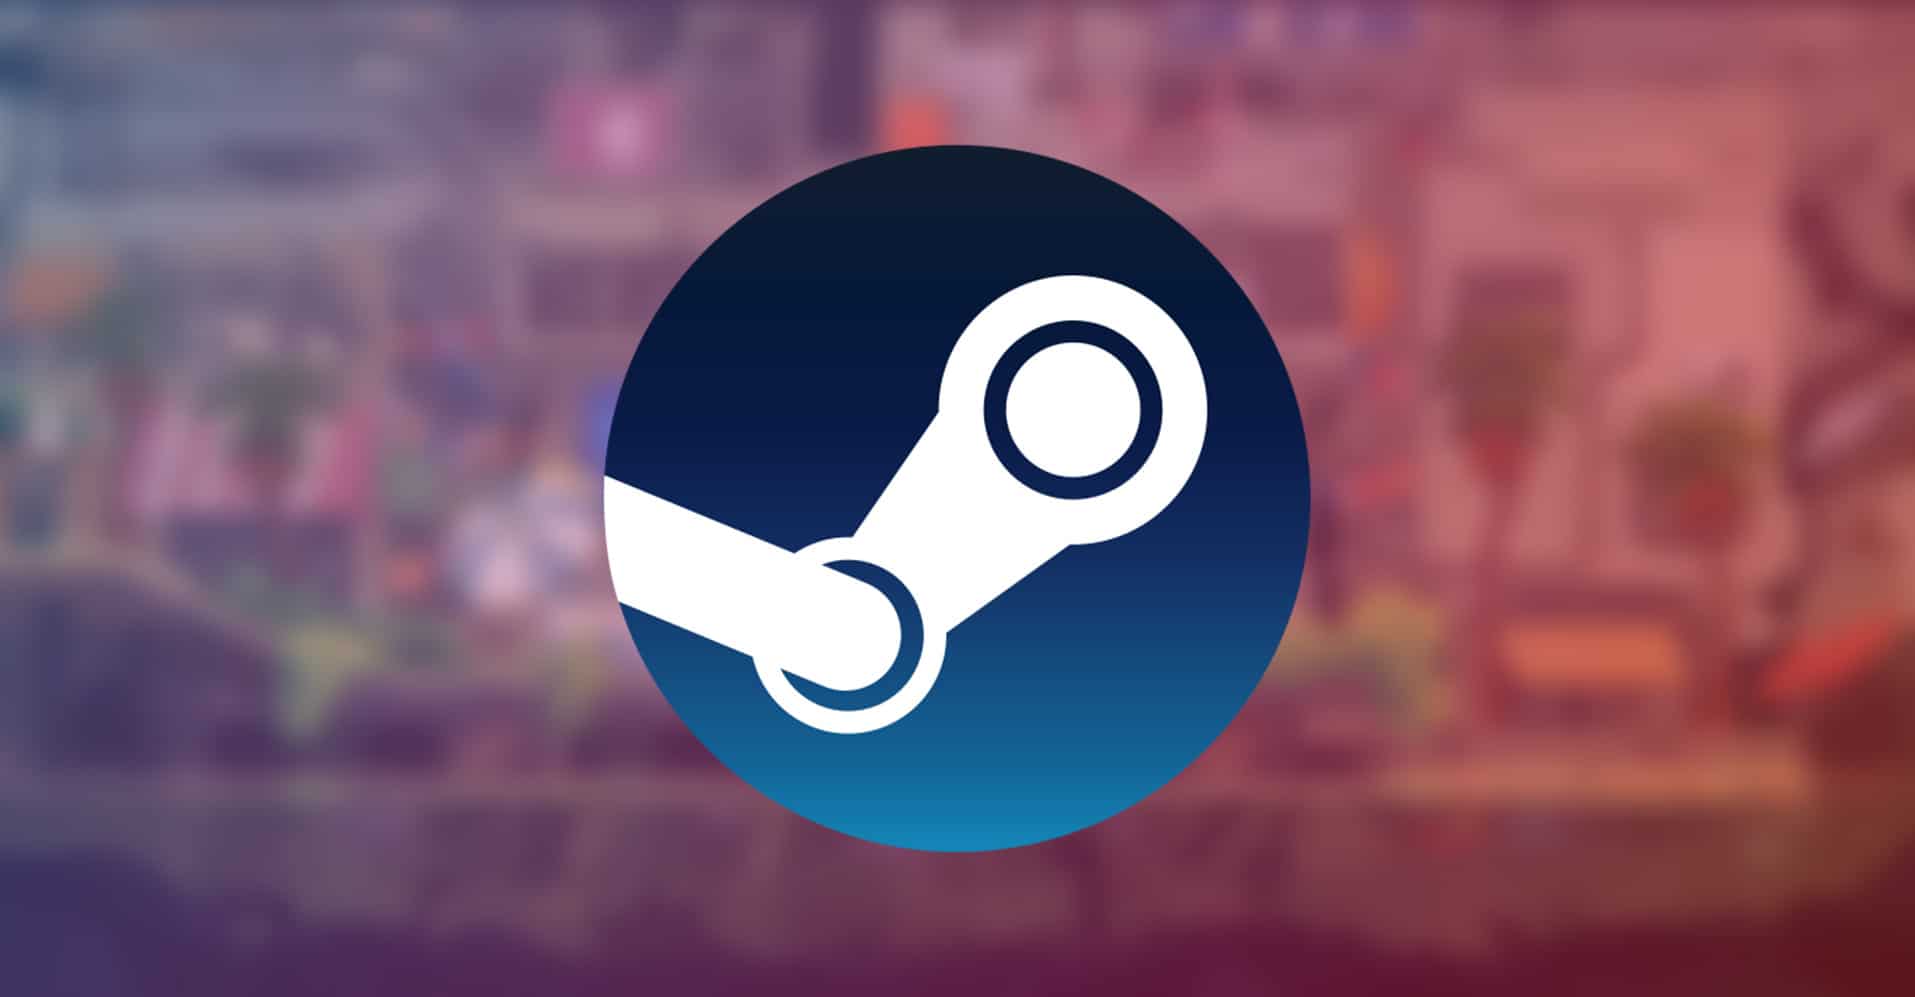 Missed out on the Steam Summer Sale? Don’t worry! Still lots of deals to be had